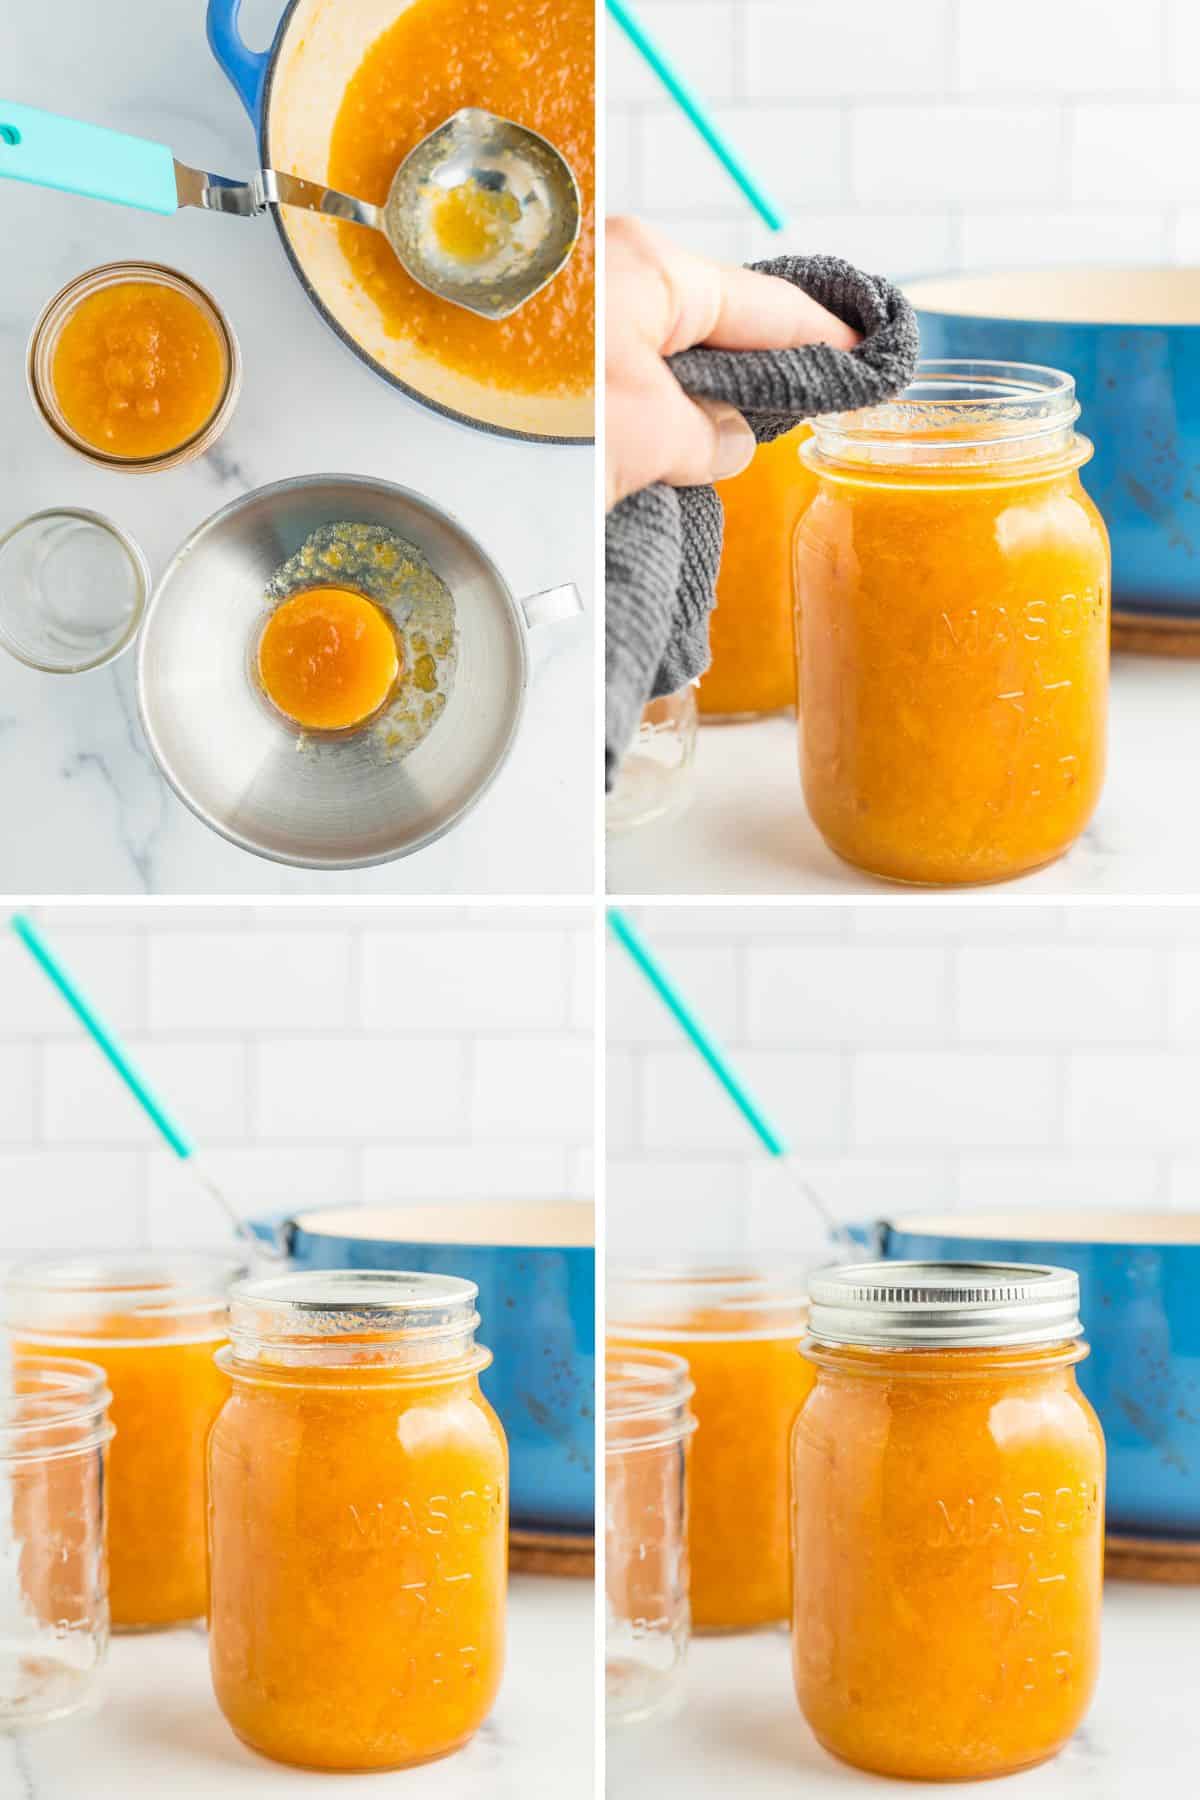 4 photos showing how to can peach preserves.